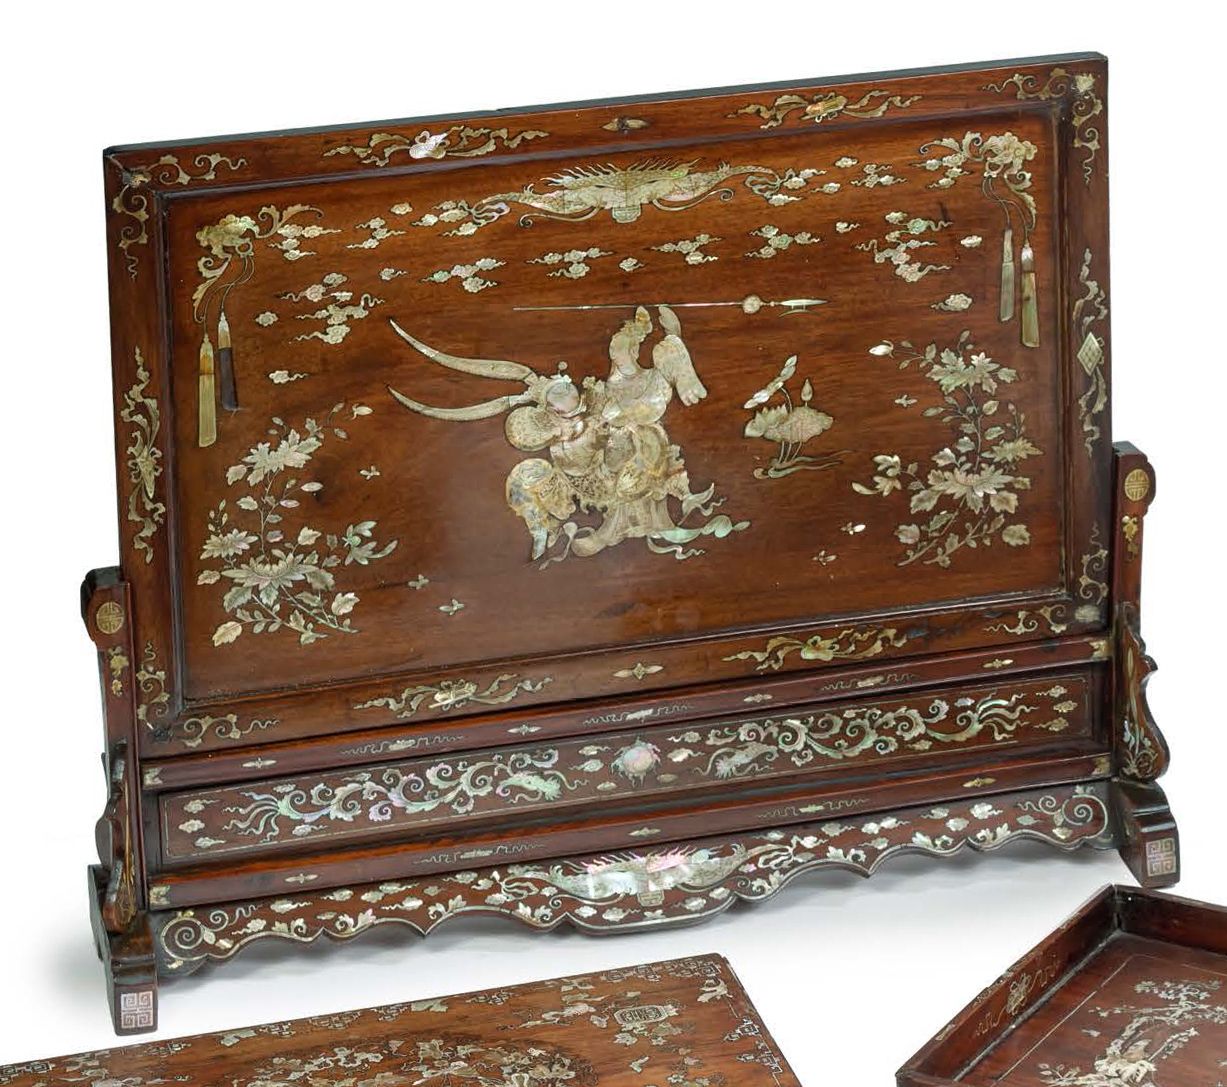 Chine du sud fin XIXe siècle 
Rosewood screen inlaid with mother-of-pearl repres&hellip;